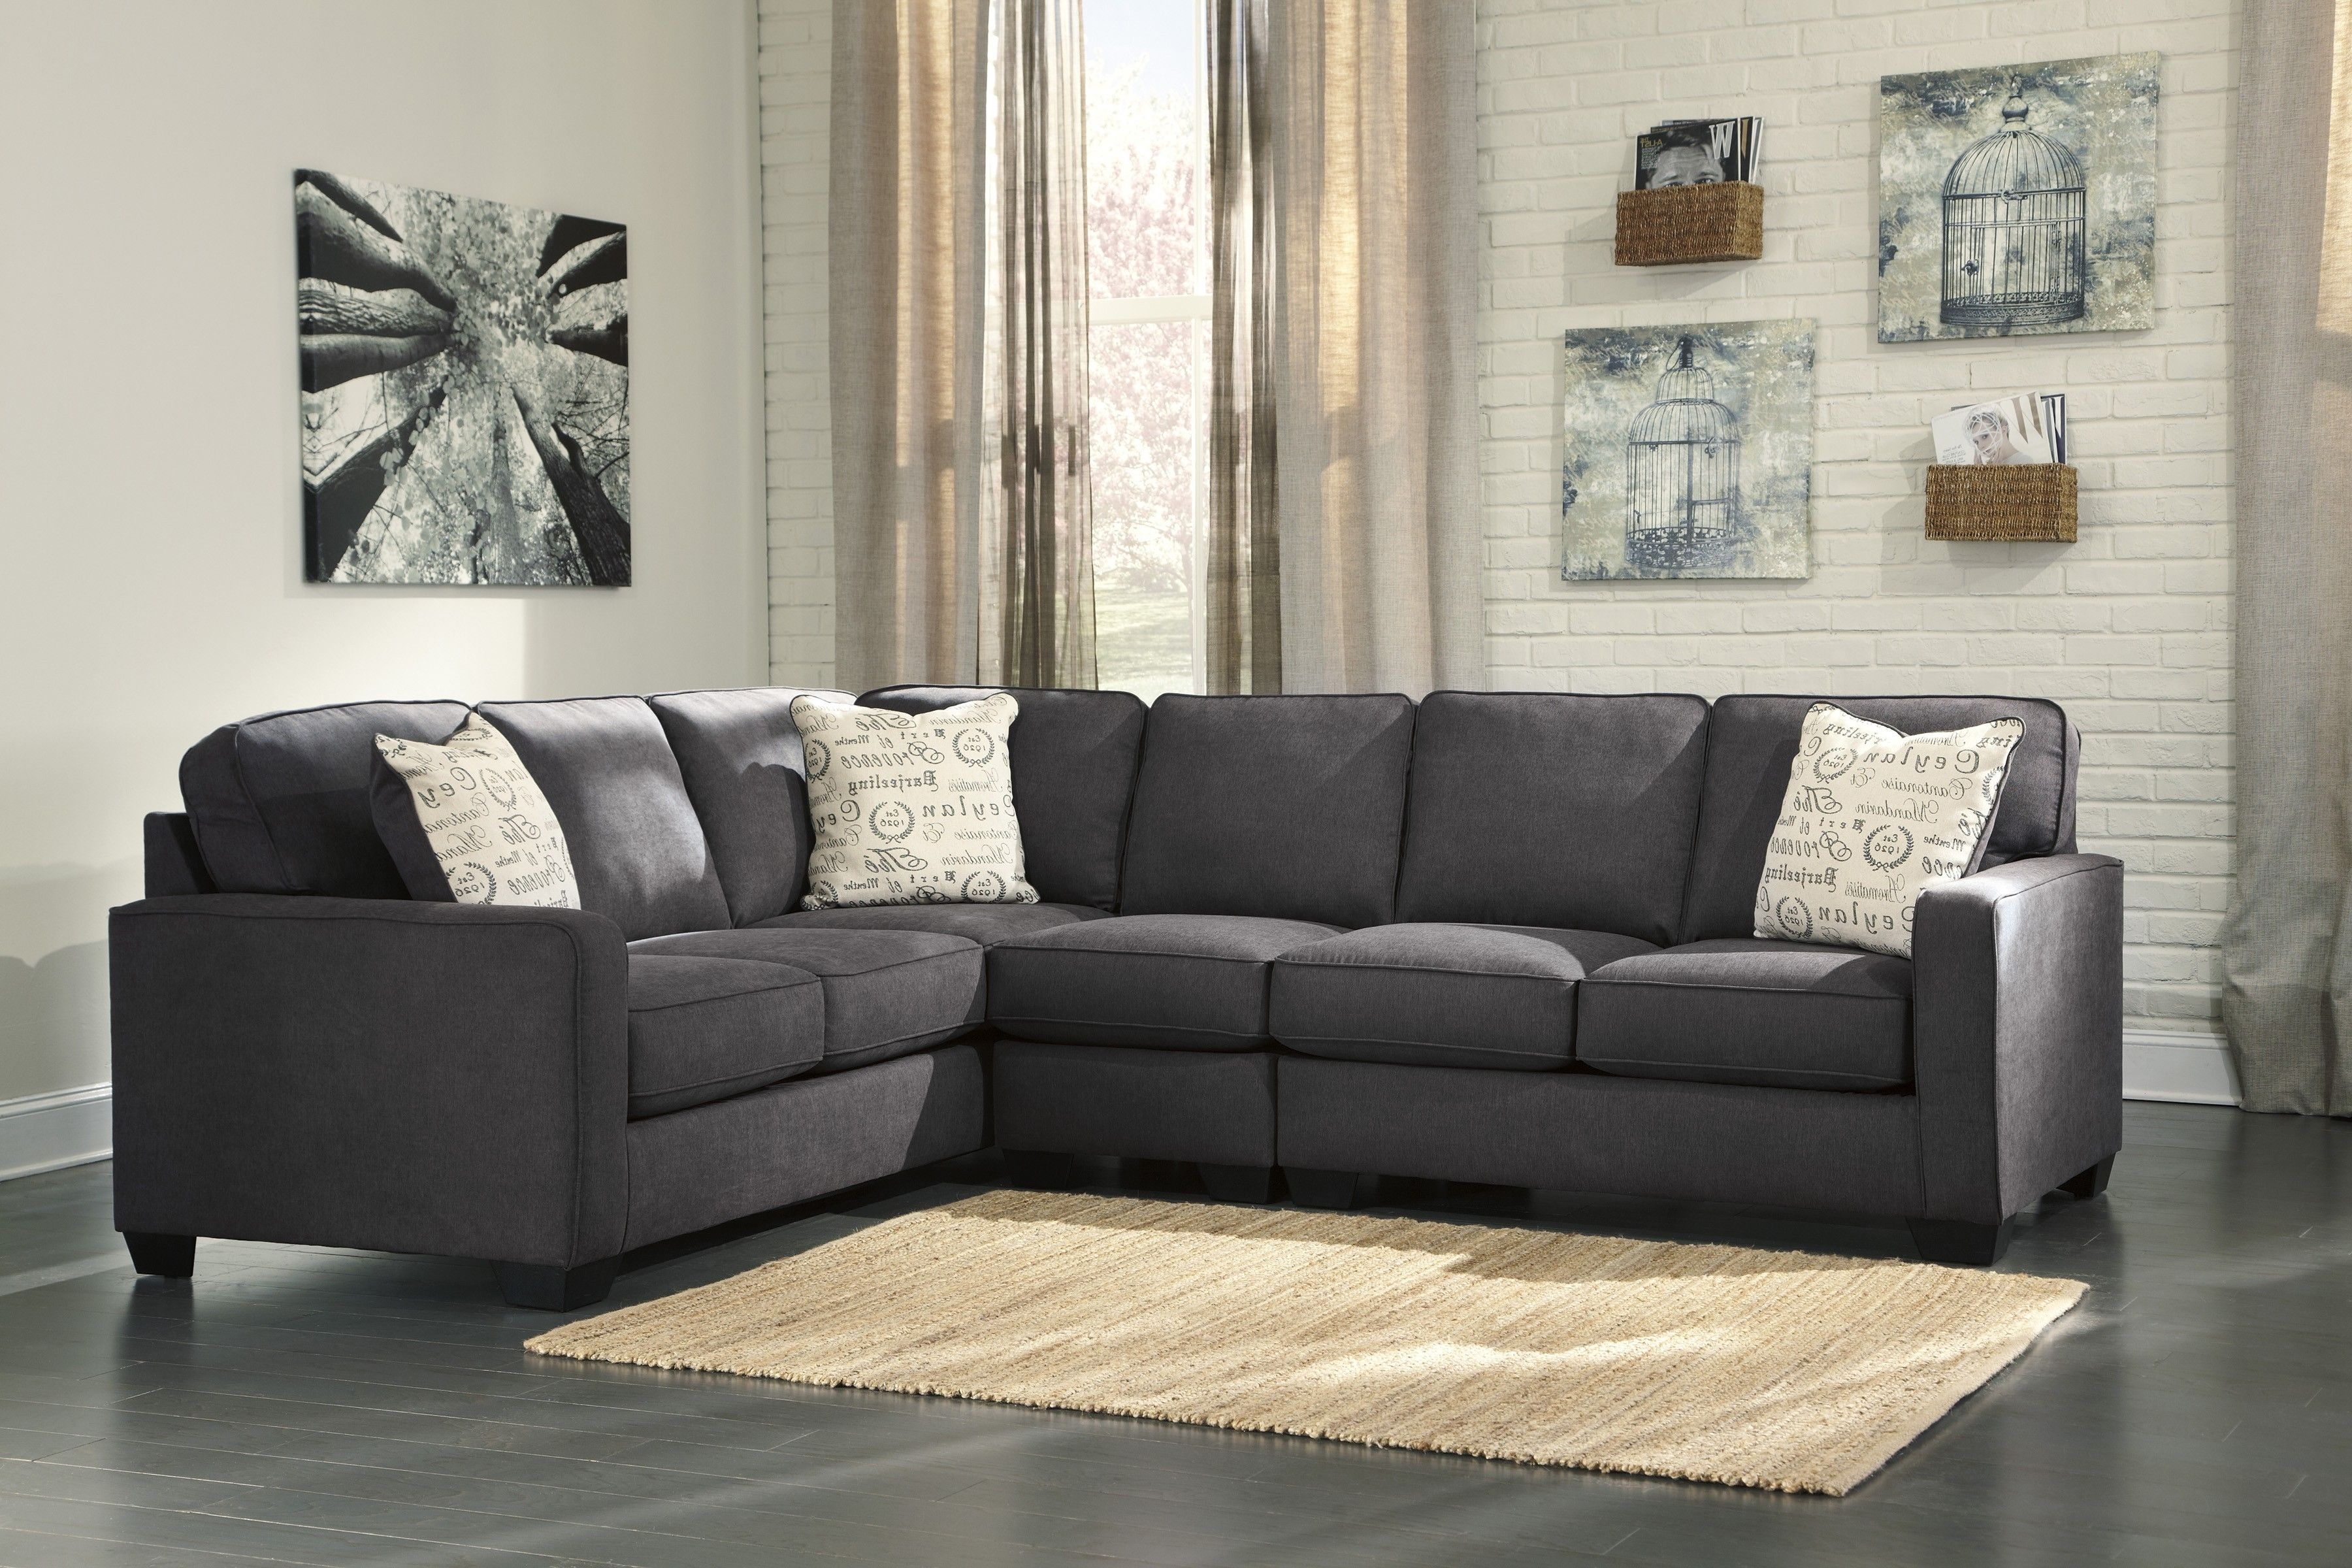 Alenya Charcoal 3 Piece Sectional Sofa For $ (View 5 of 10)